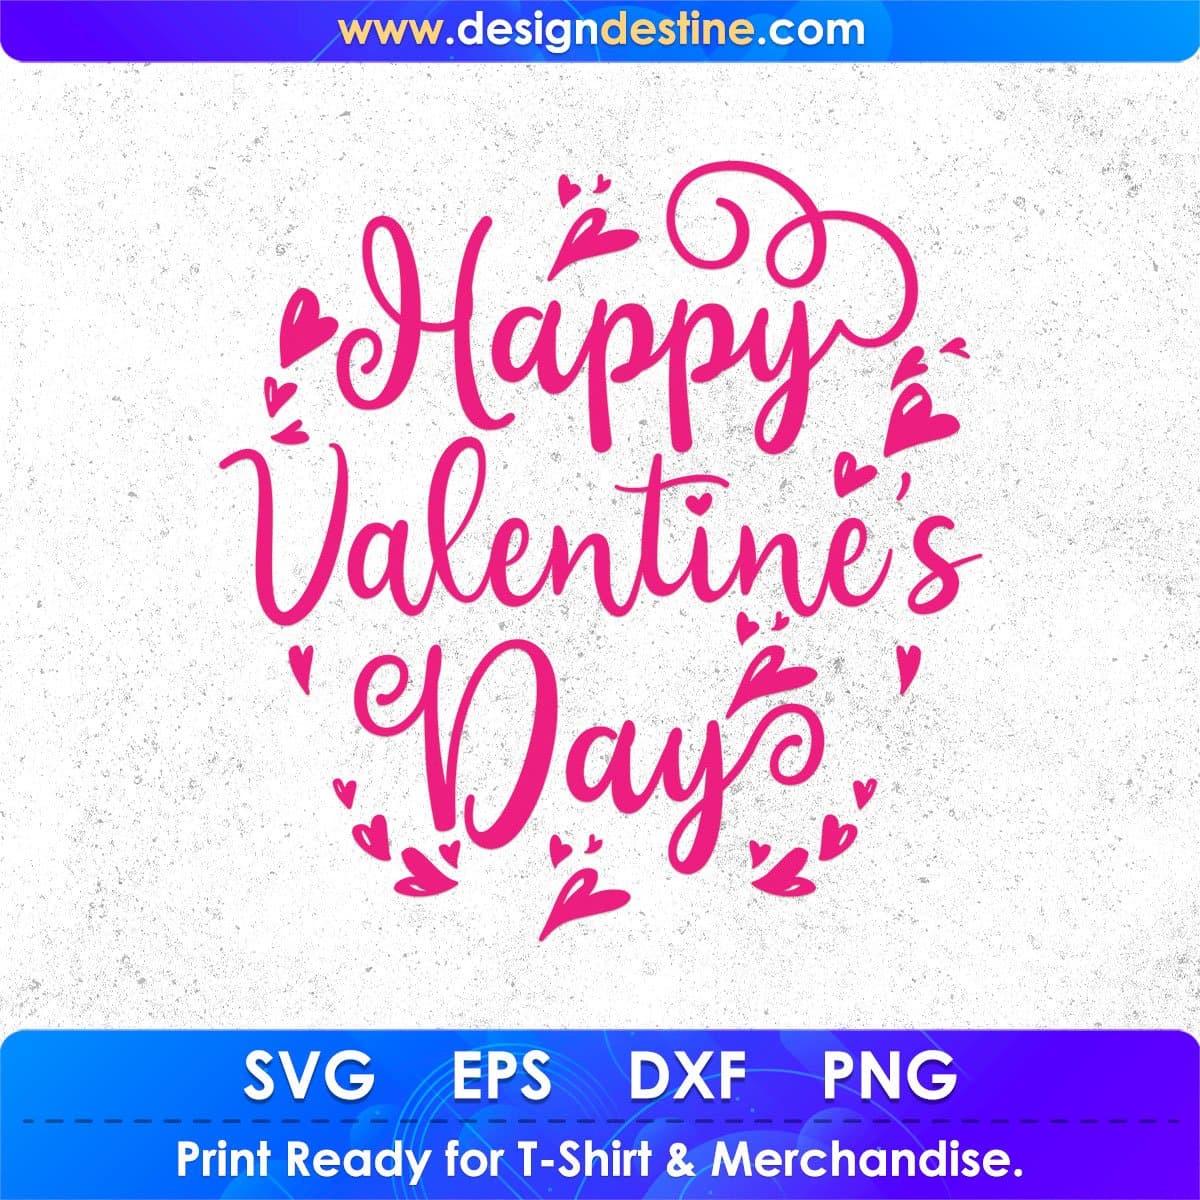 Happy Valentine's Day Love T shirt Design In Svg Png Cutting Printable Files